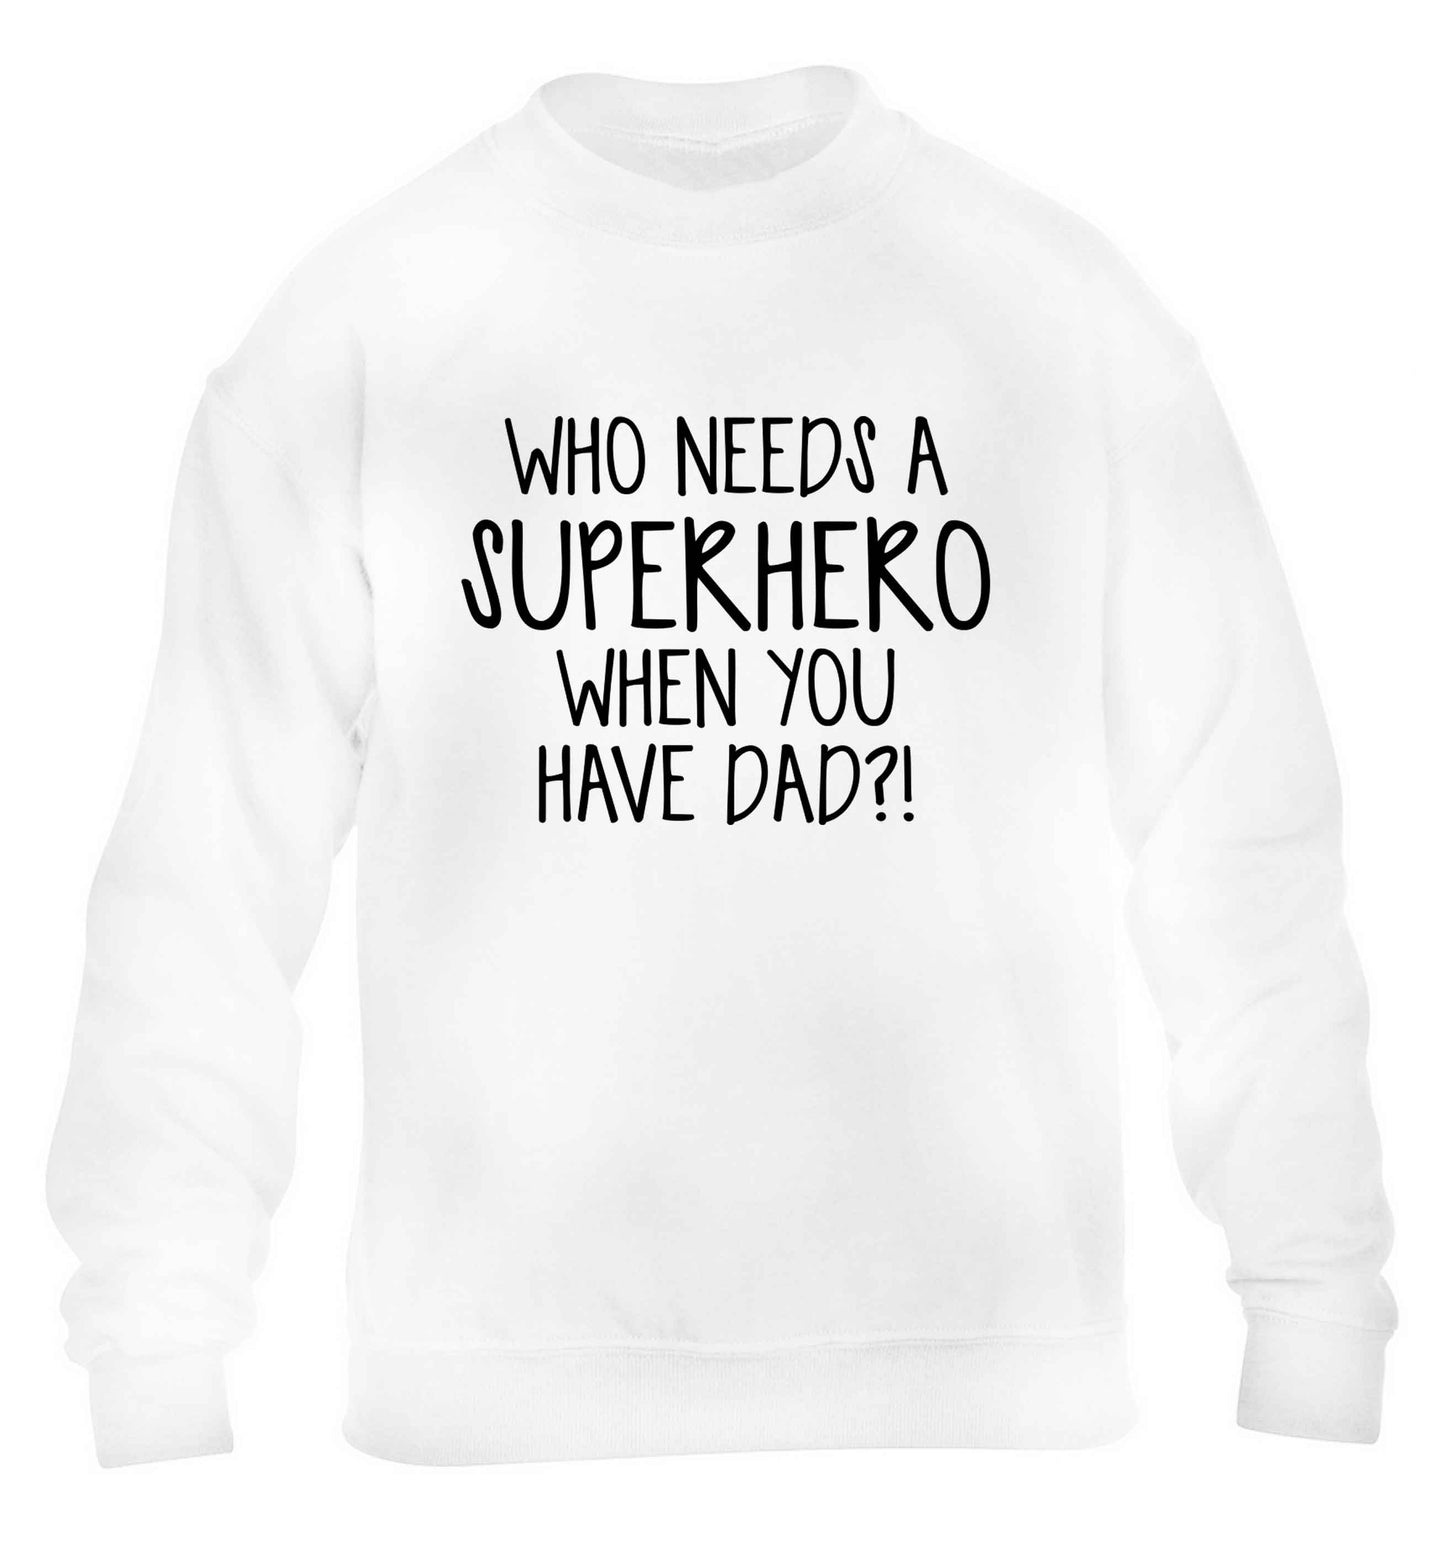 Who needs a superhero when you have dad! children's white sweater 12-13 Years